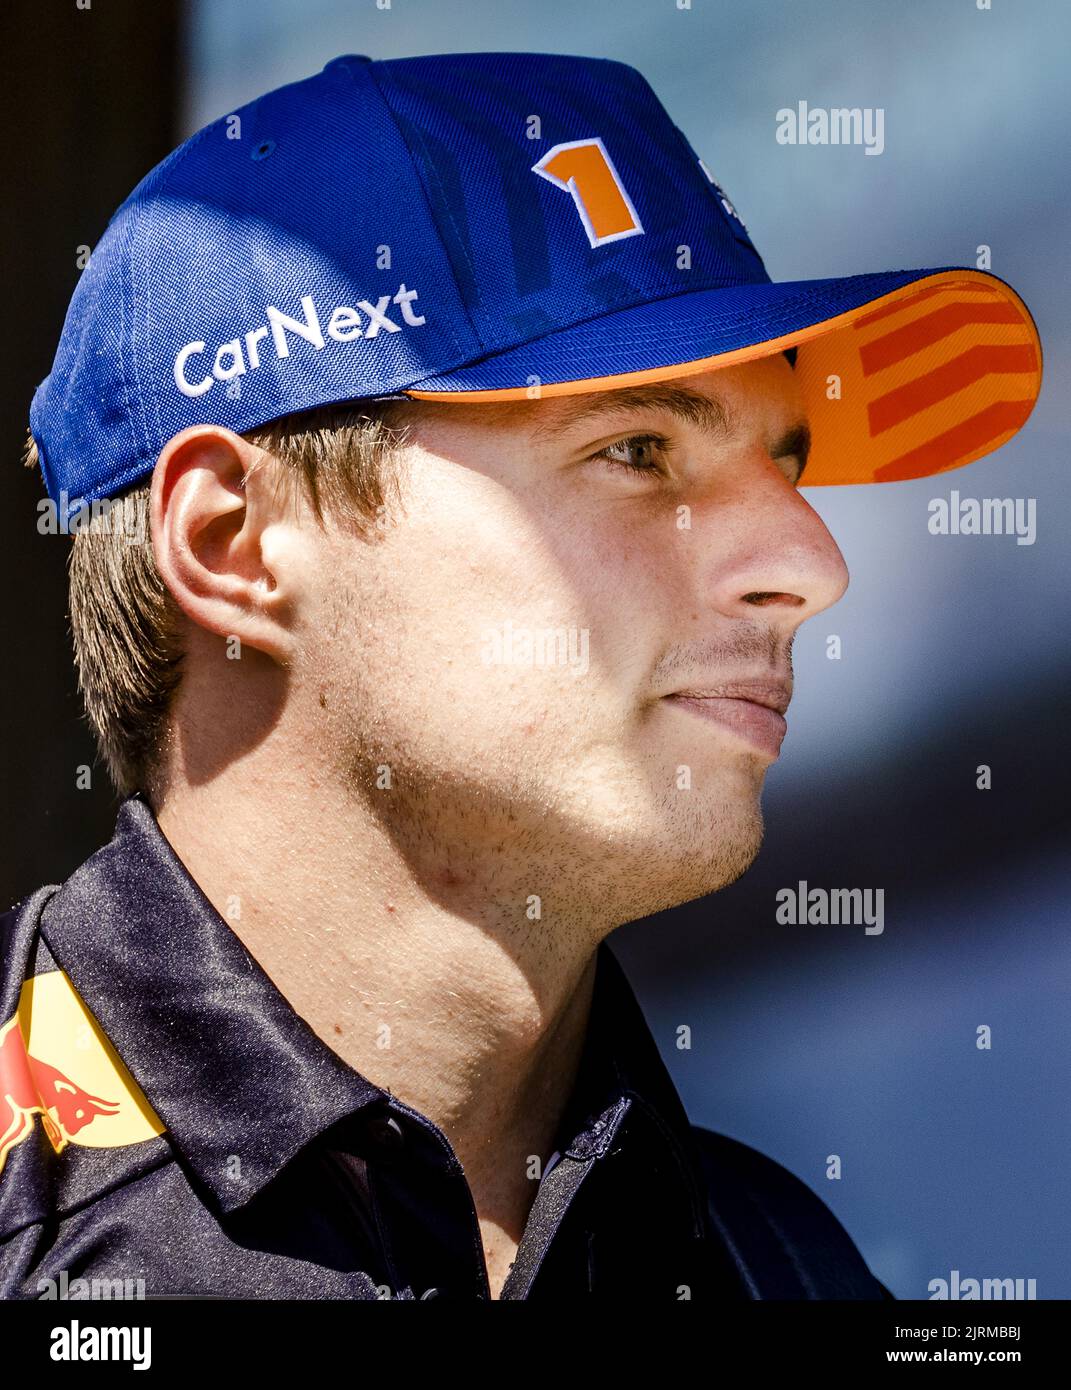 2022-08-25 14:06:34 SPA - Max Verstappen (Red Bull Racing) arrives at the Spa-Francorchamps race track in the run-up to the Belgian Grand Prix. ANP SEM VAN DER WAL netherlands out - belgium out Credit: ANP/Alamy Live News Credit: ANP/Alamy Live News Stock Photo